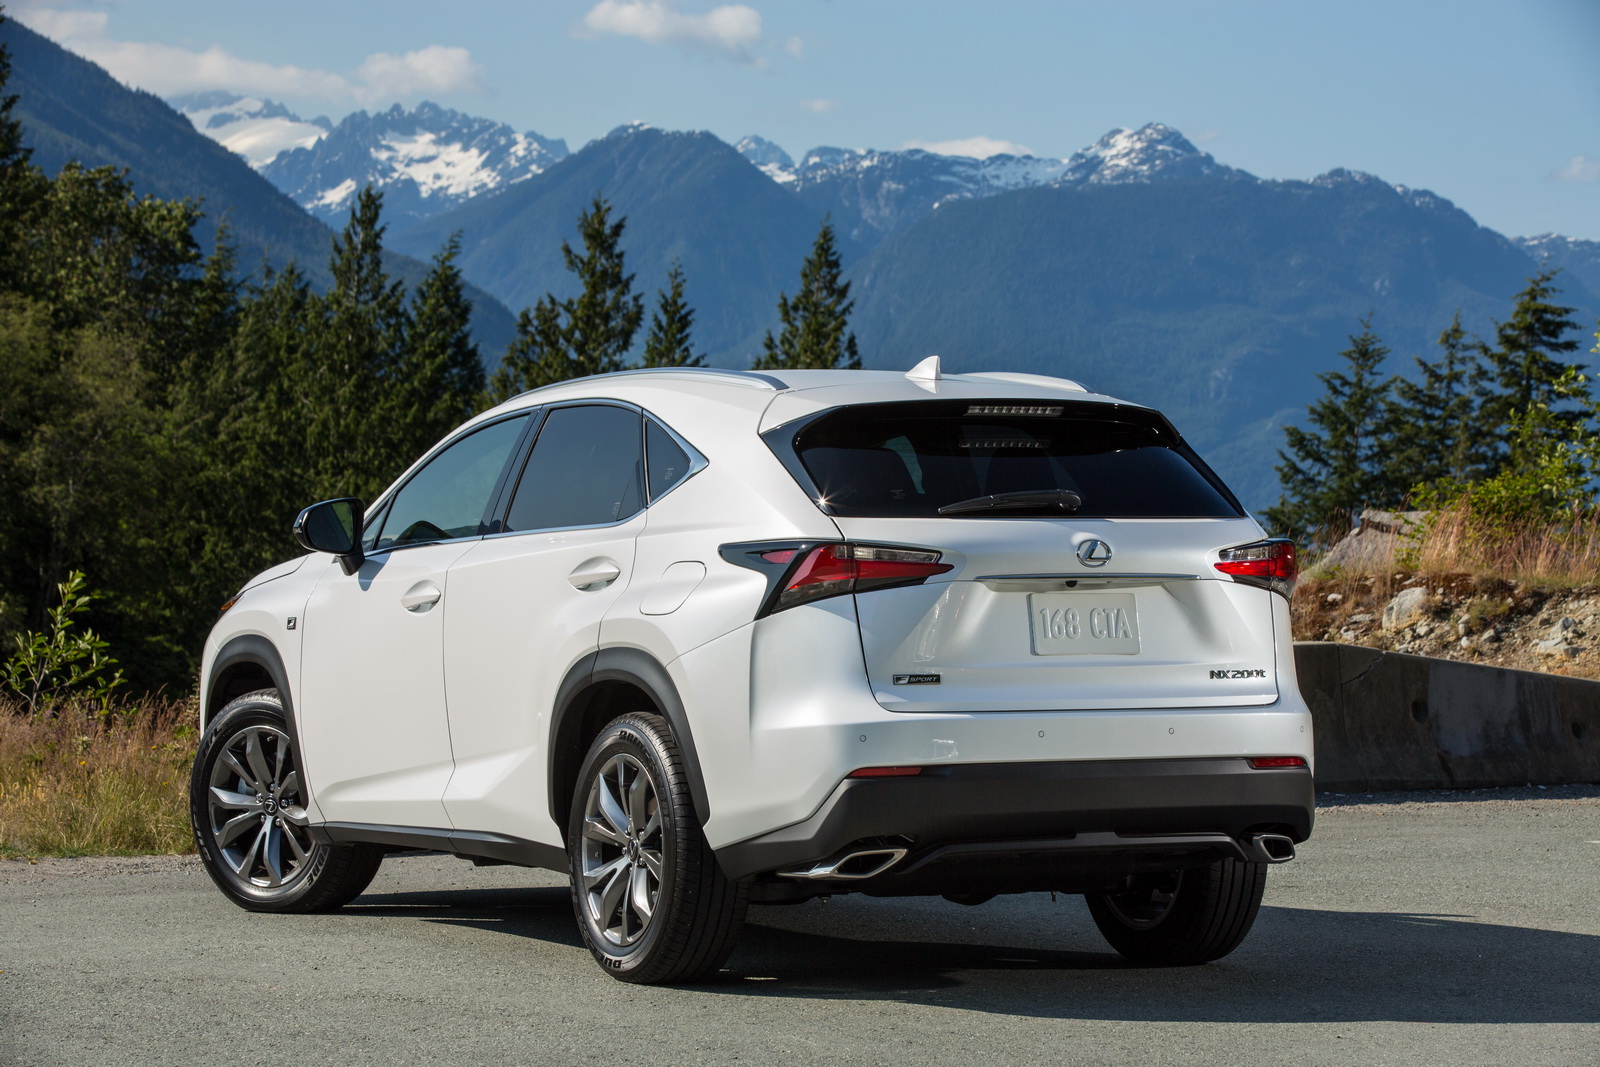 Canada Gets Tweaked 2017 Lexus NX From CAD $42,750 | Carscoops